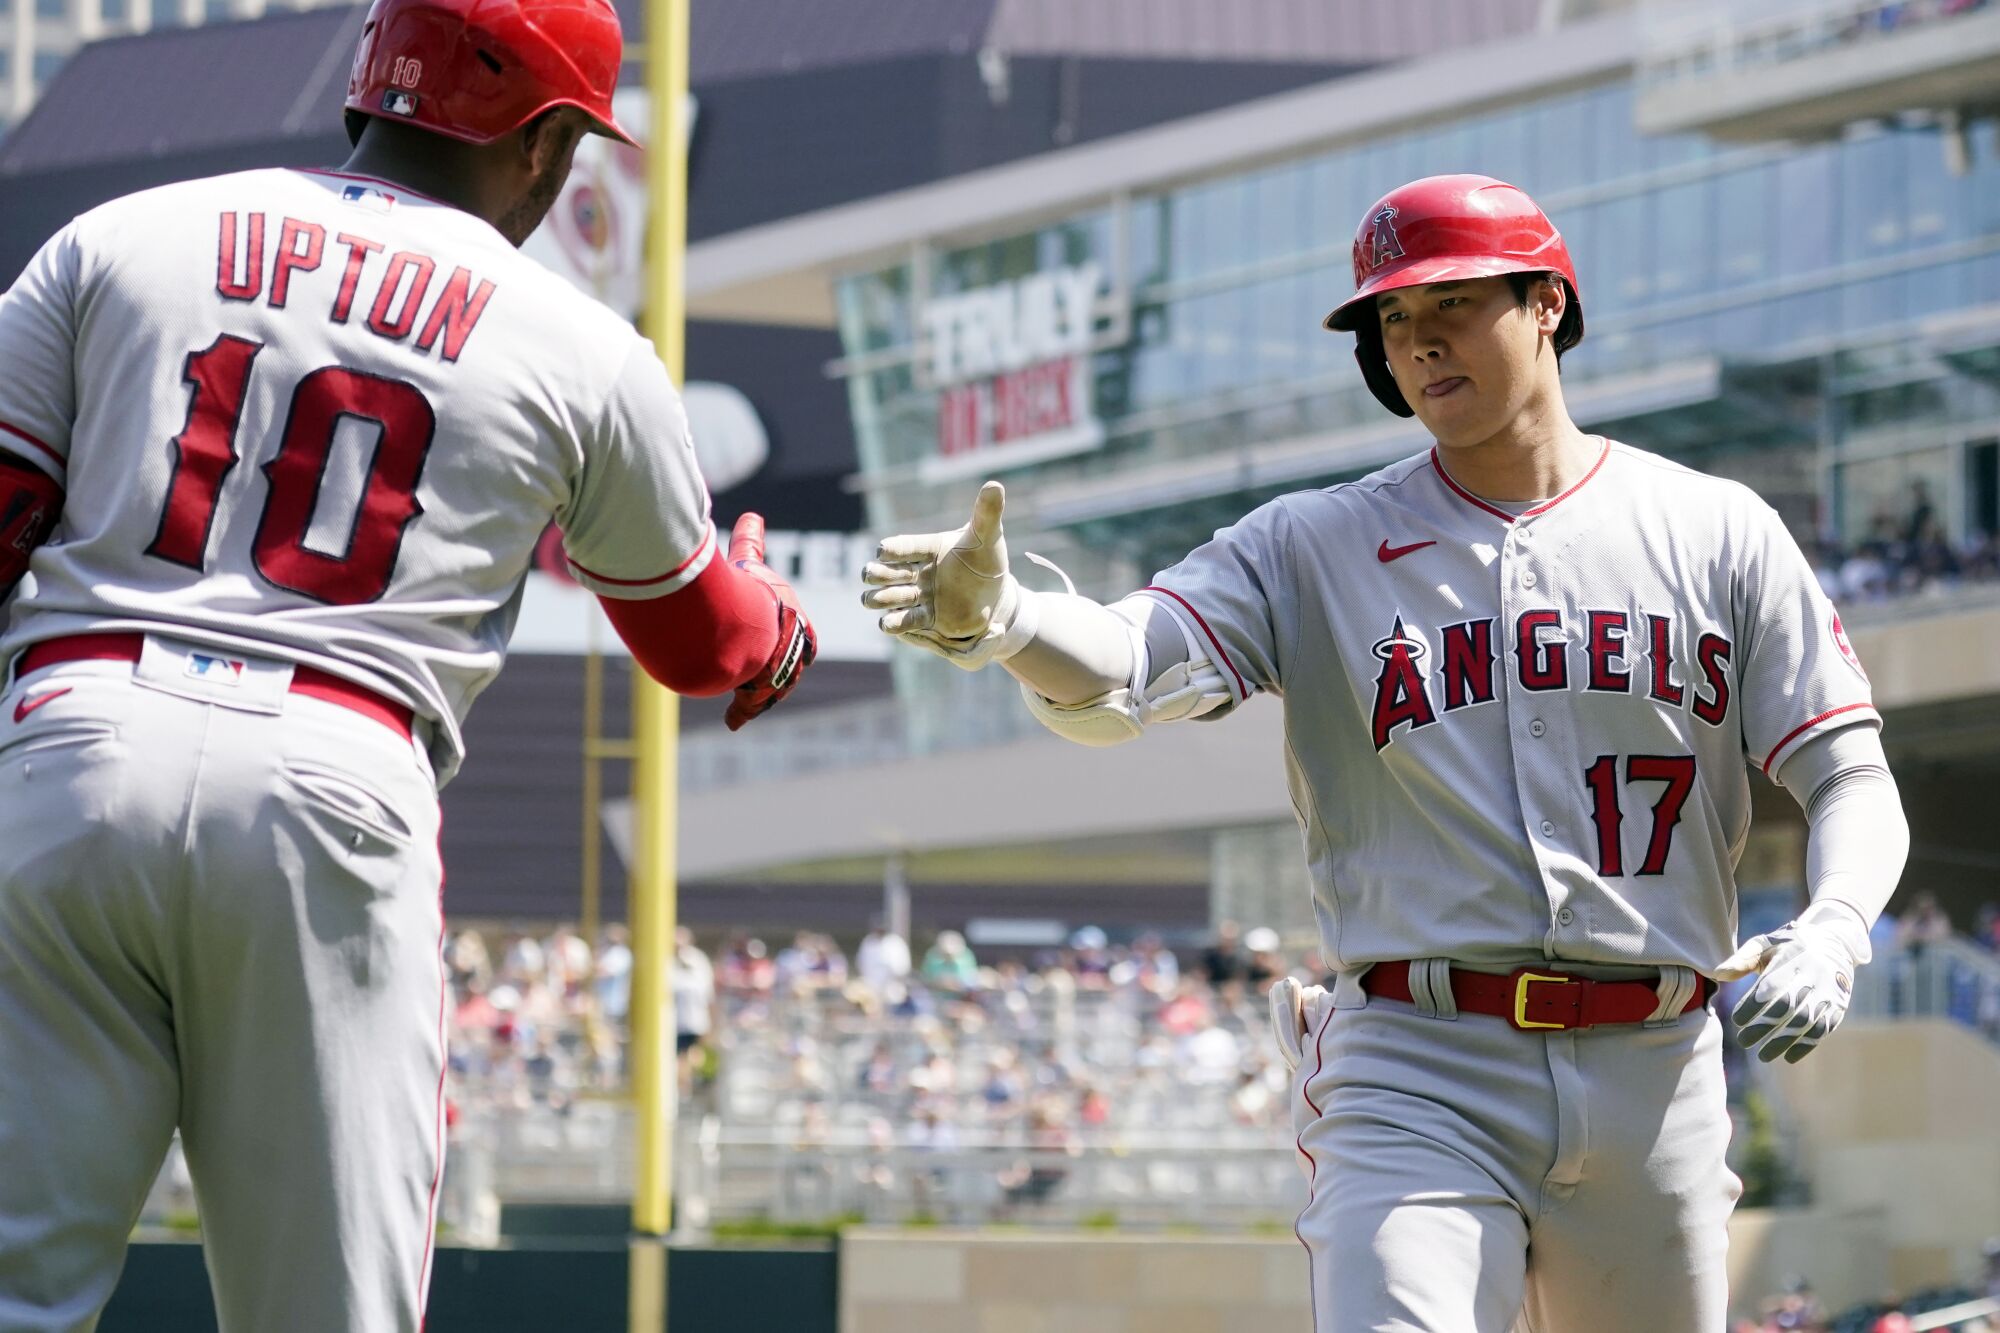 Shohei Ohtani hit his 35th home run in the Angels' 6-2 win on Sunday. (AP Photo/Jim Mone)